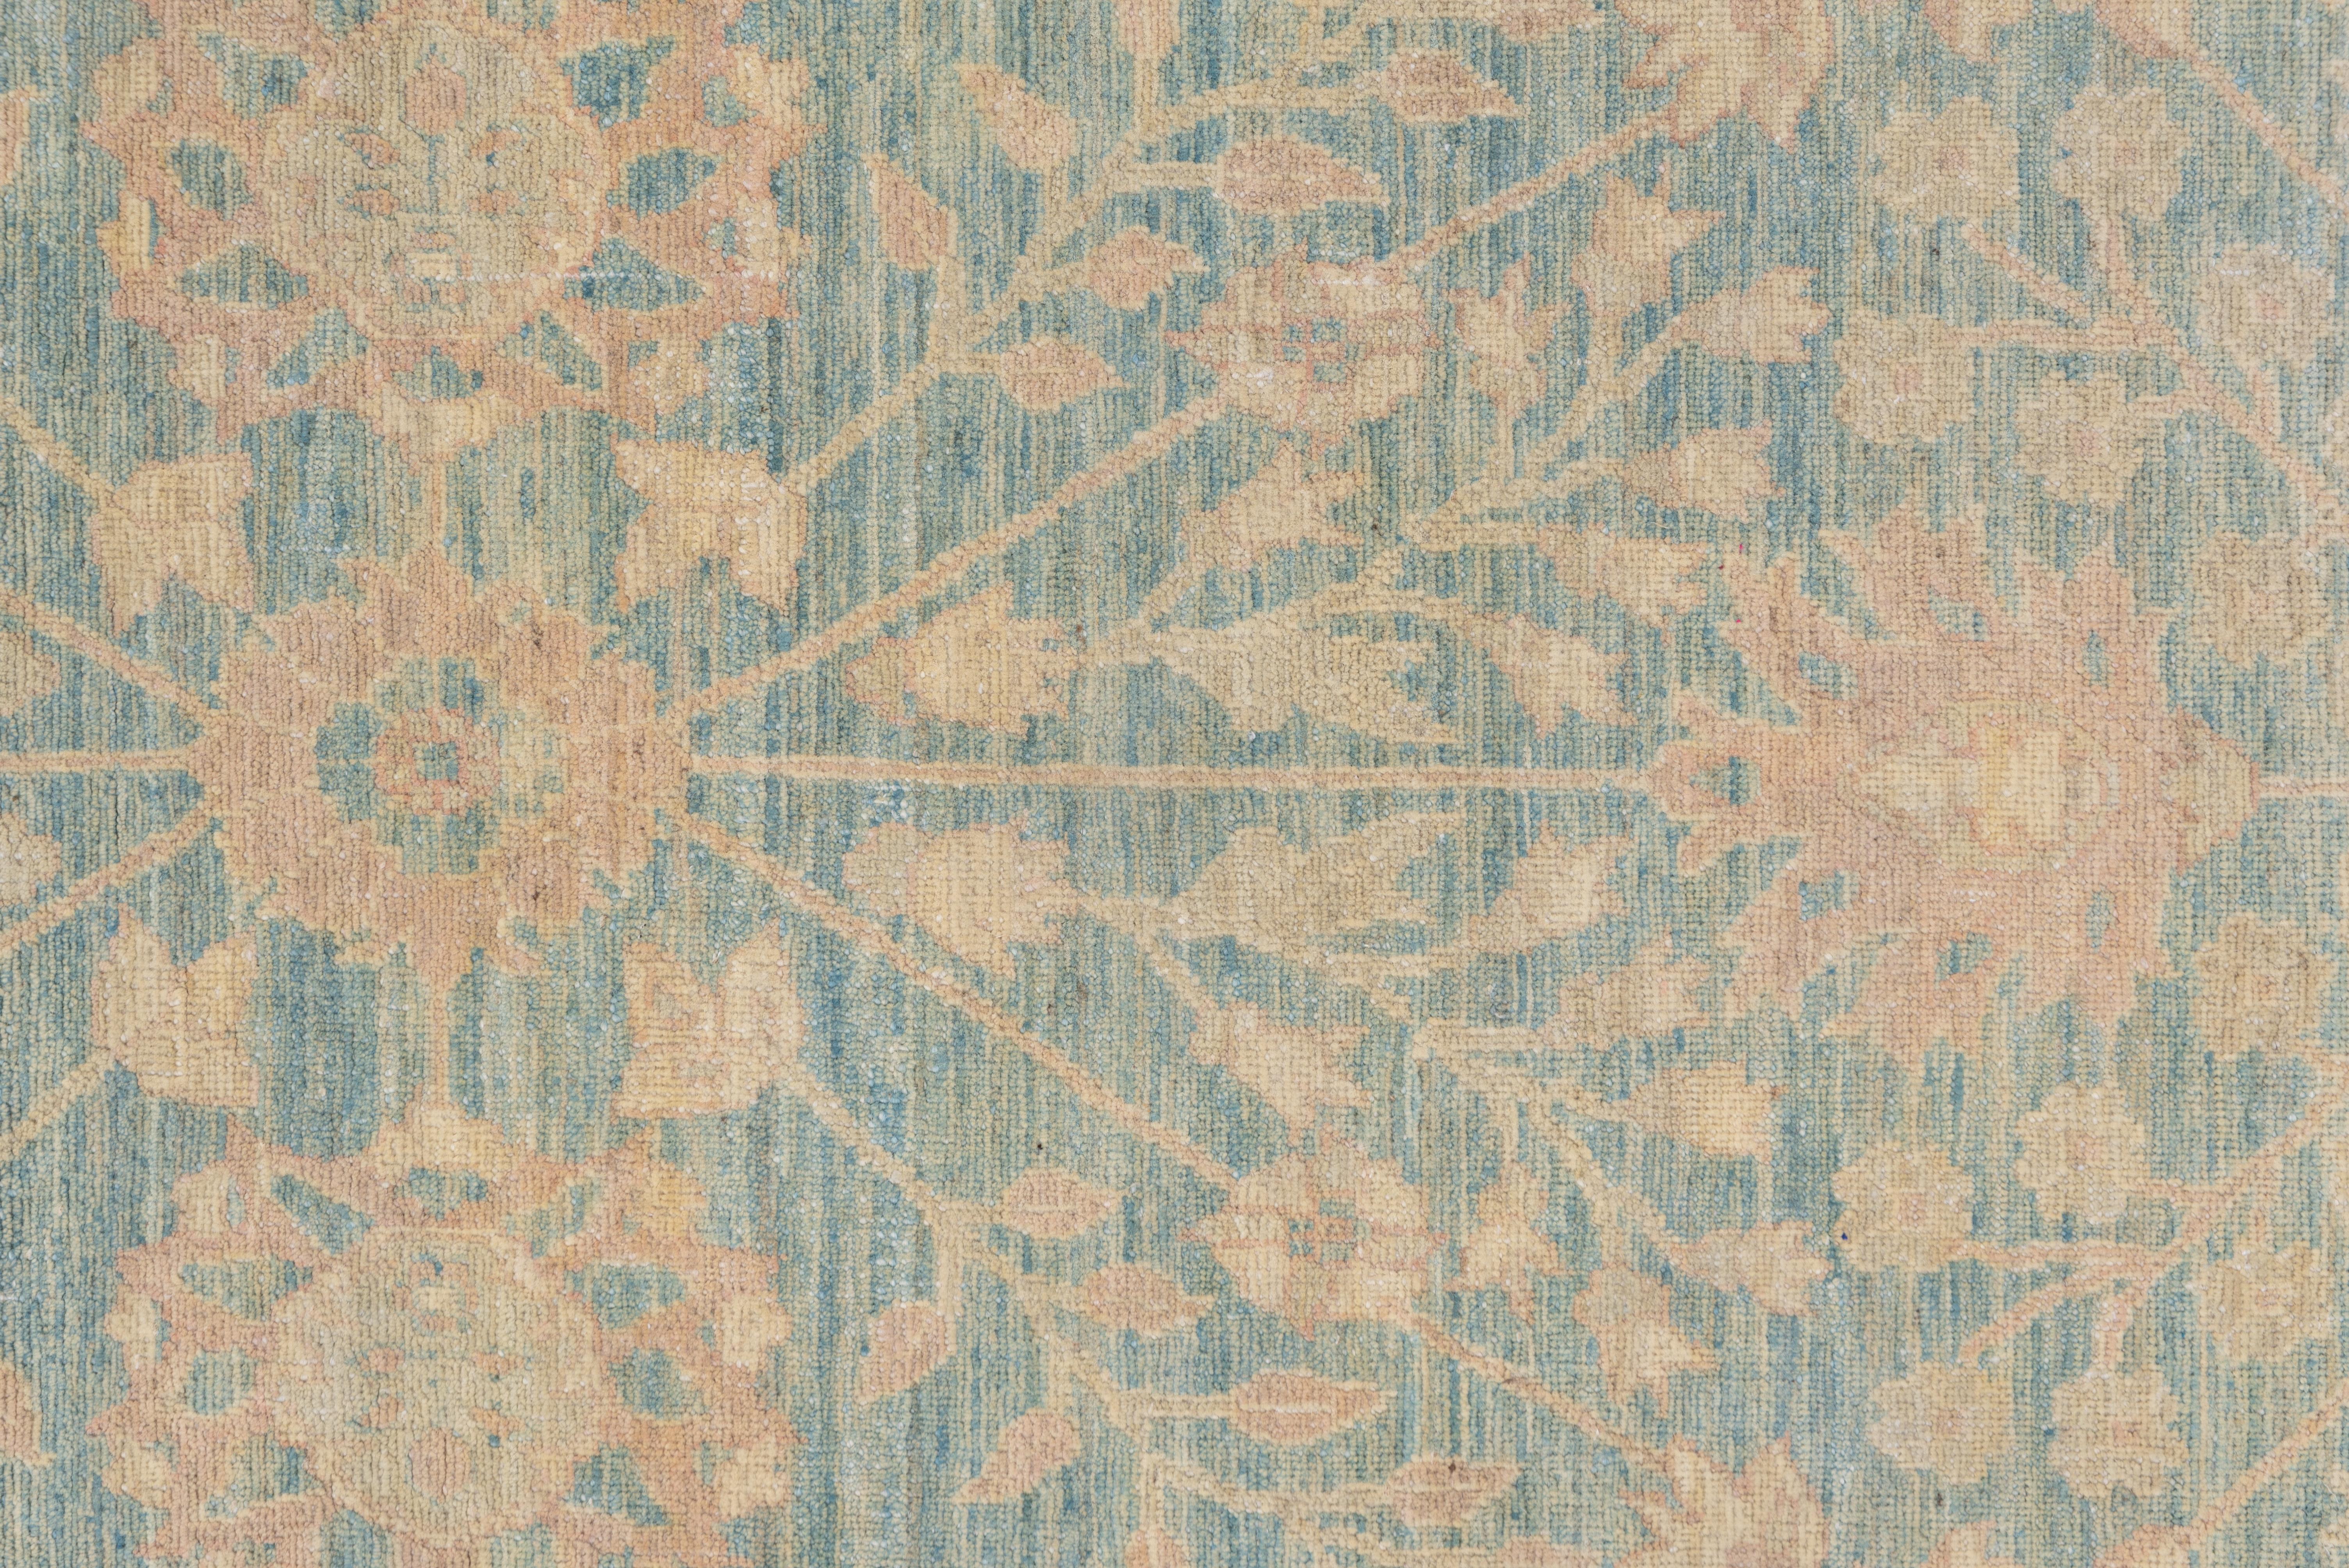 This carpet has a closely patterned all-over rosette and flowering stem layout on an attractively abrashed blue-grey field. The old ivory border shows reversing palmettes separated by oblique, leafy stem segments.
 